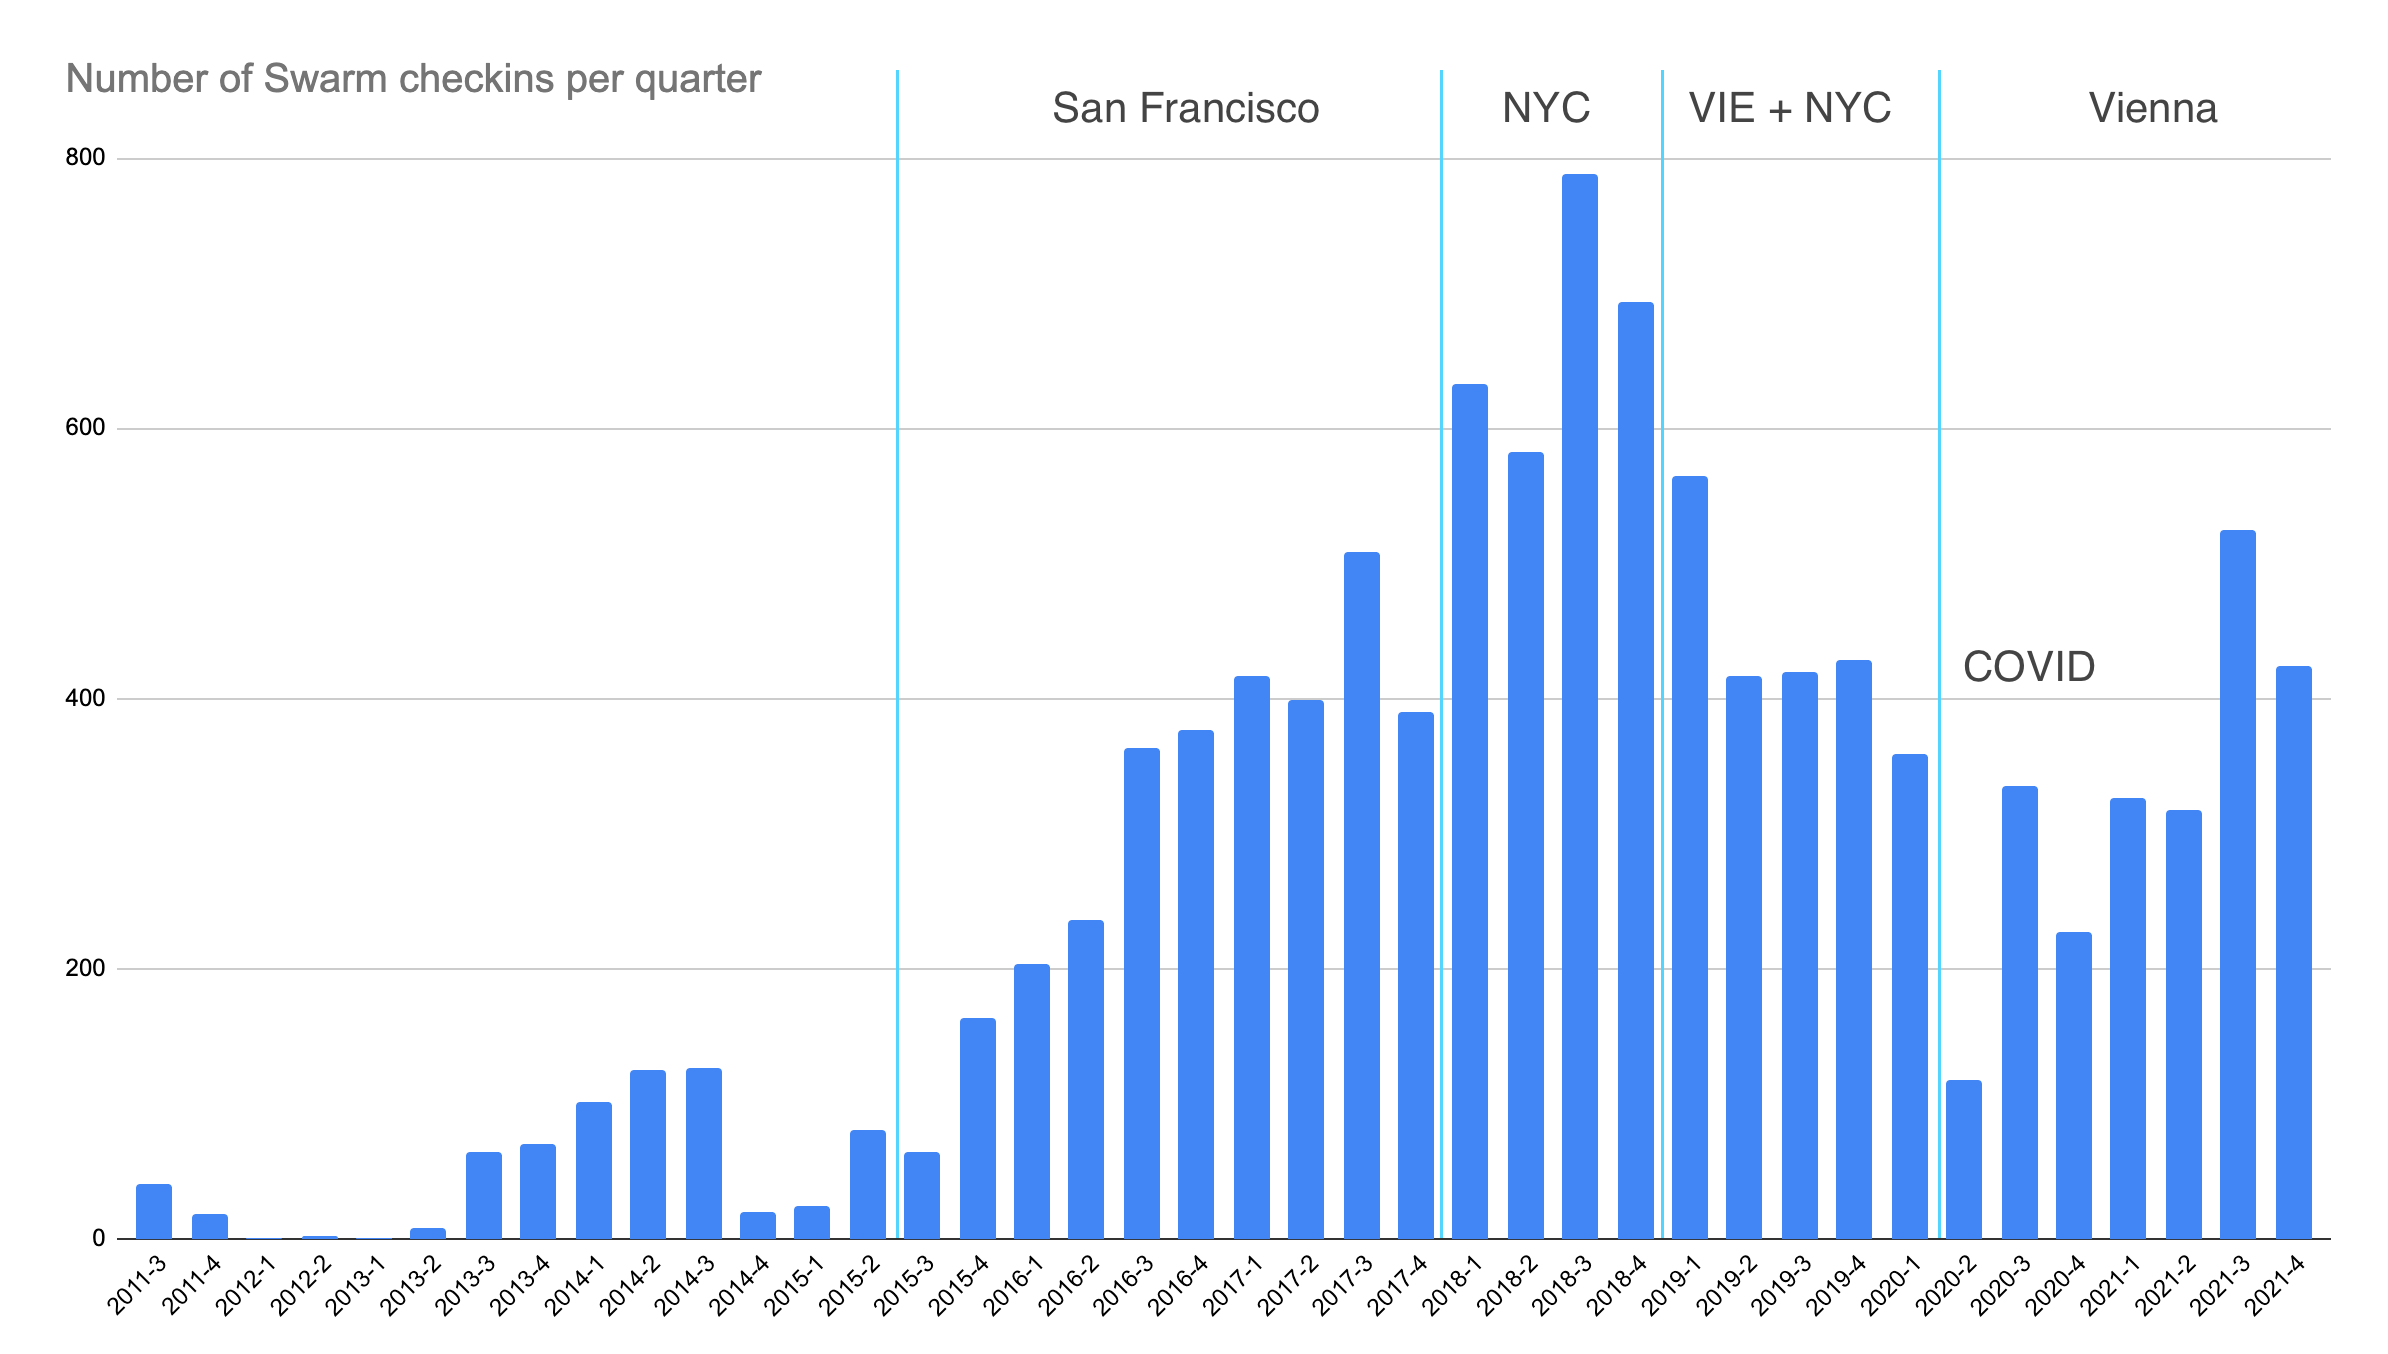 Number of Swarm Check-Ins over Time